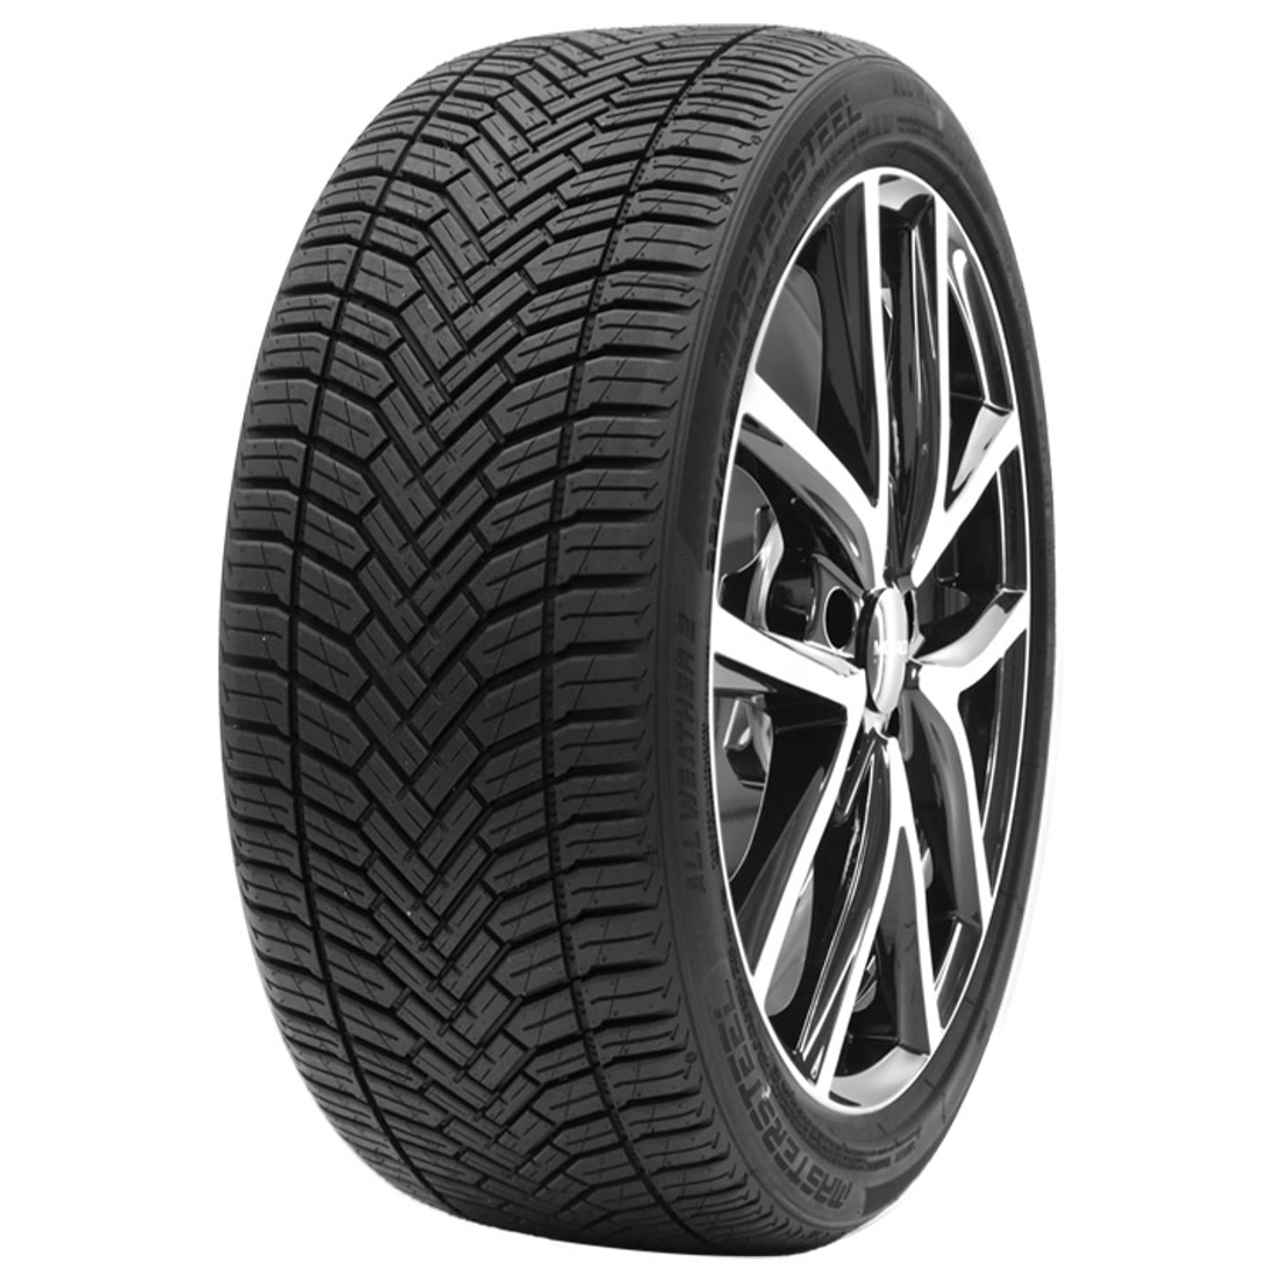 MASTERSTEEL ALL WEATHER 2 225/50R17 98V BSW